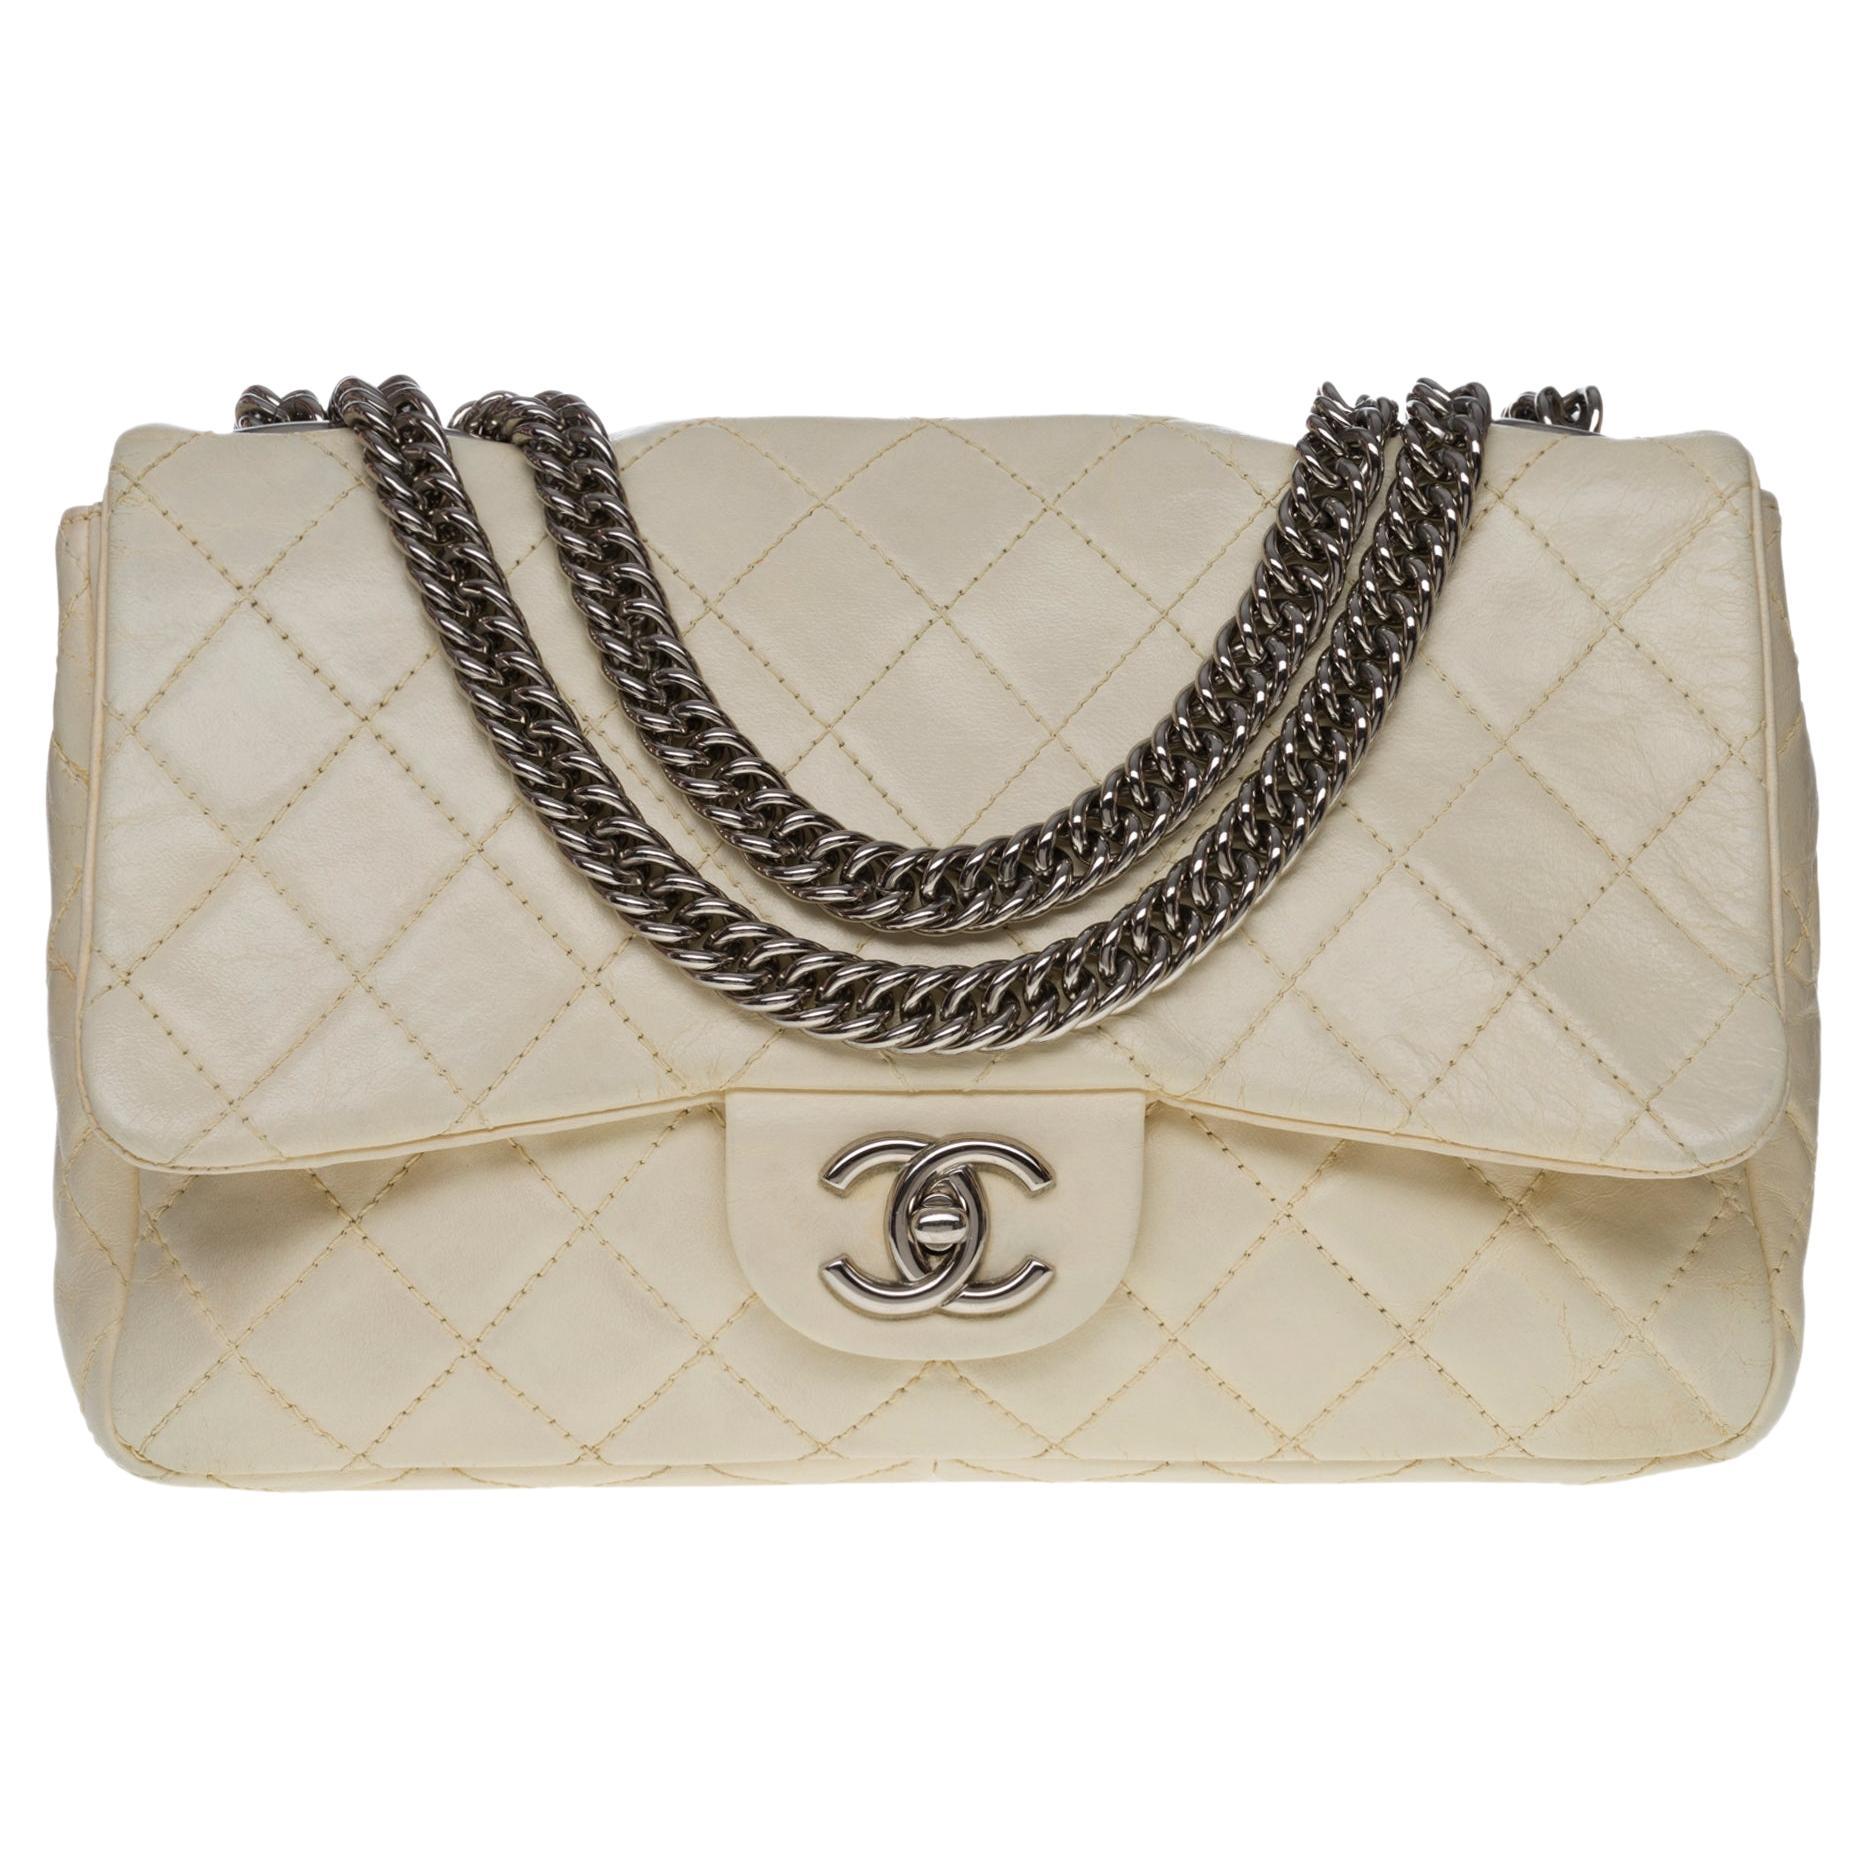 Chanel Timeless/Classic double Flap shoulder bag in Beige quilted